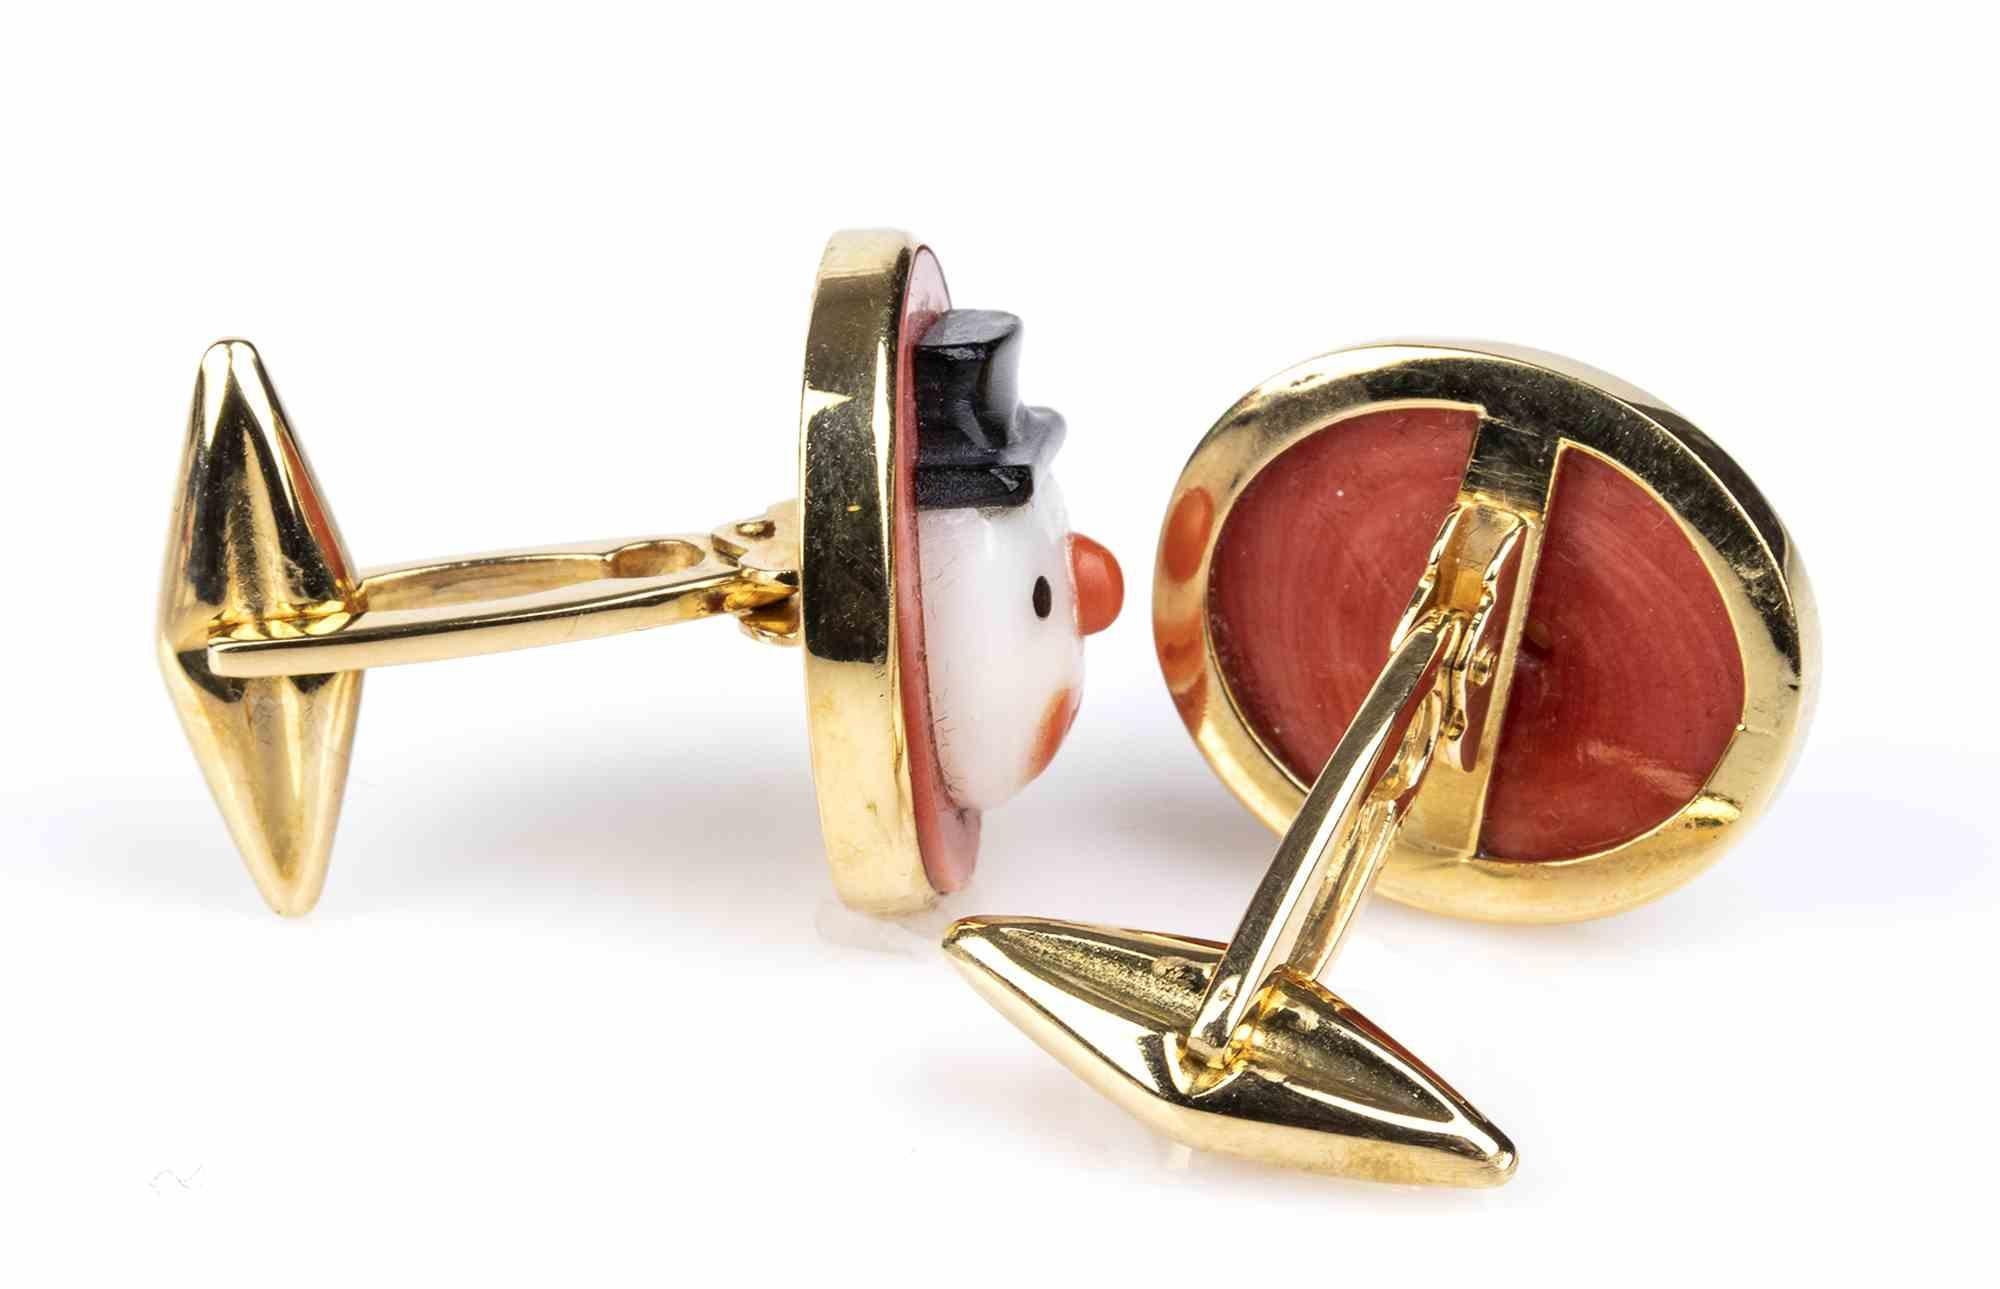 Gold, Cerasuolo coral and onyx cufflinks

18k yellow gold, each with round shape, featuring the head of a snowman in onyx and Cerasuolo coral (corallium elatius). Stamped 